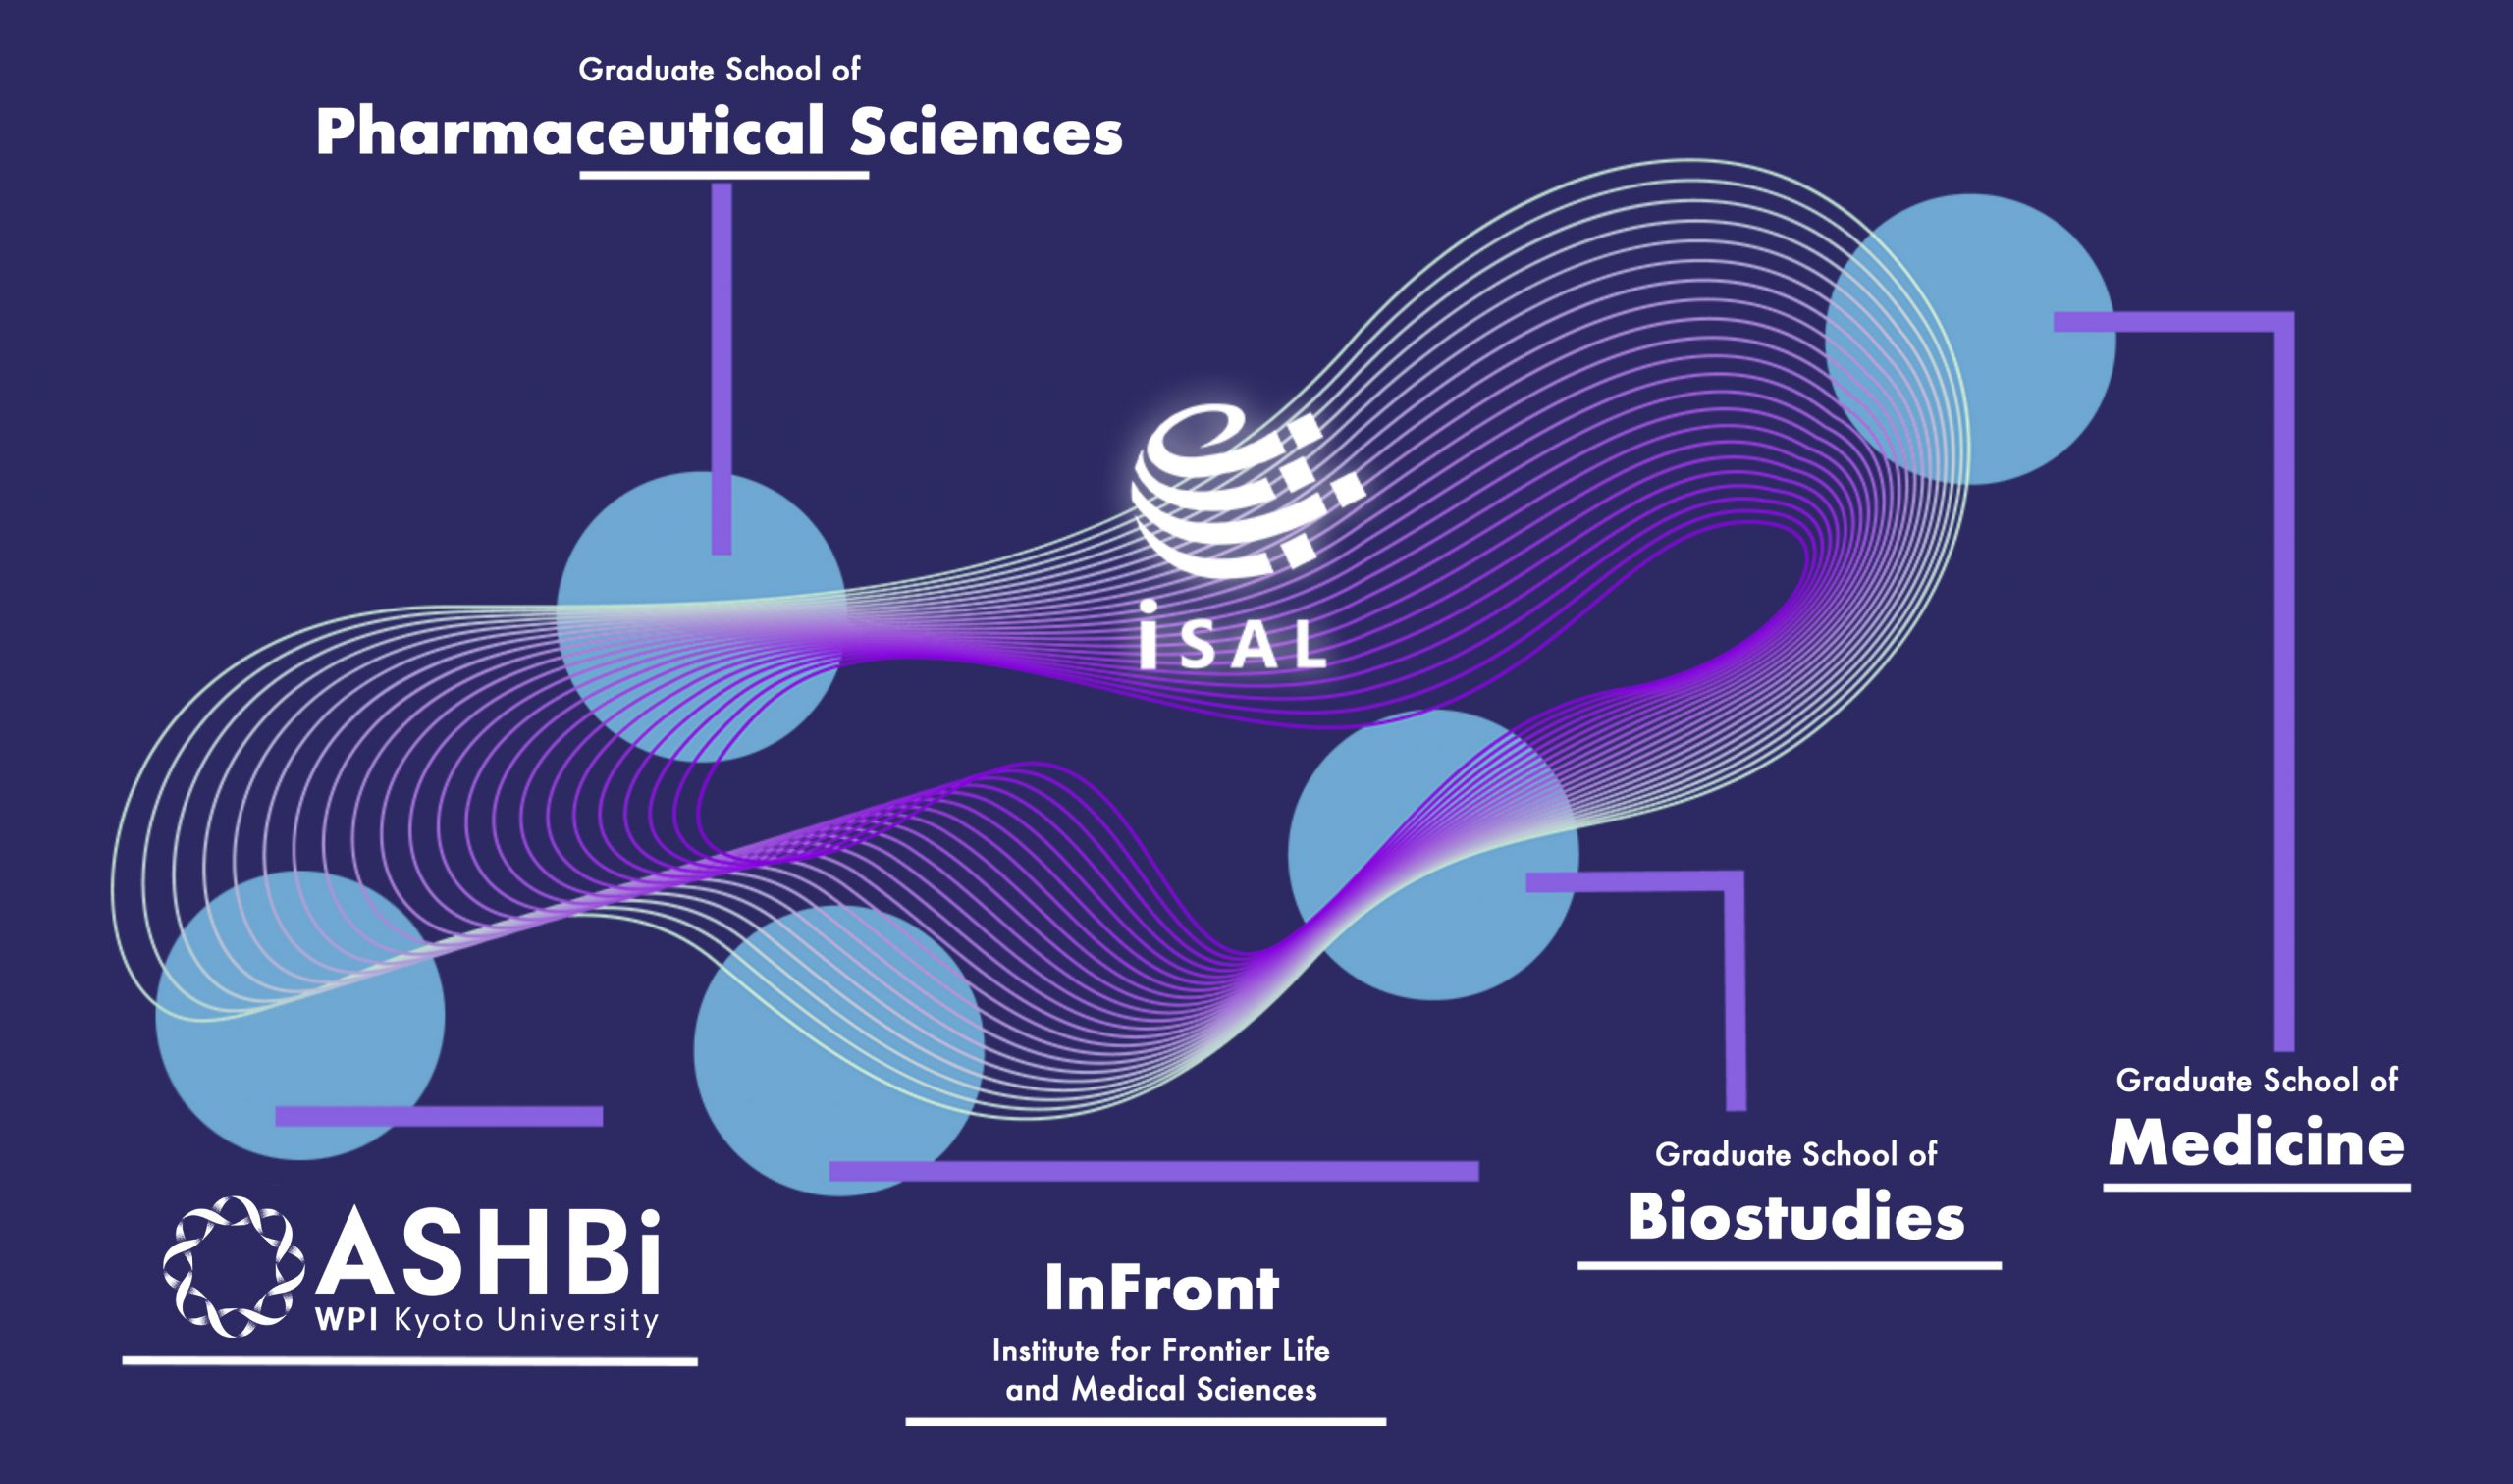 Overview of iSAL